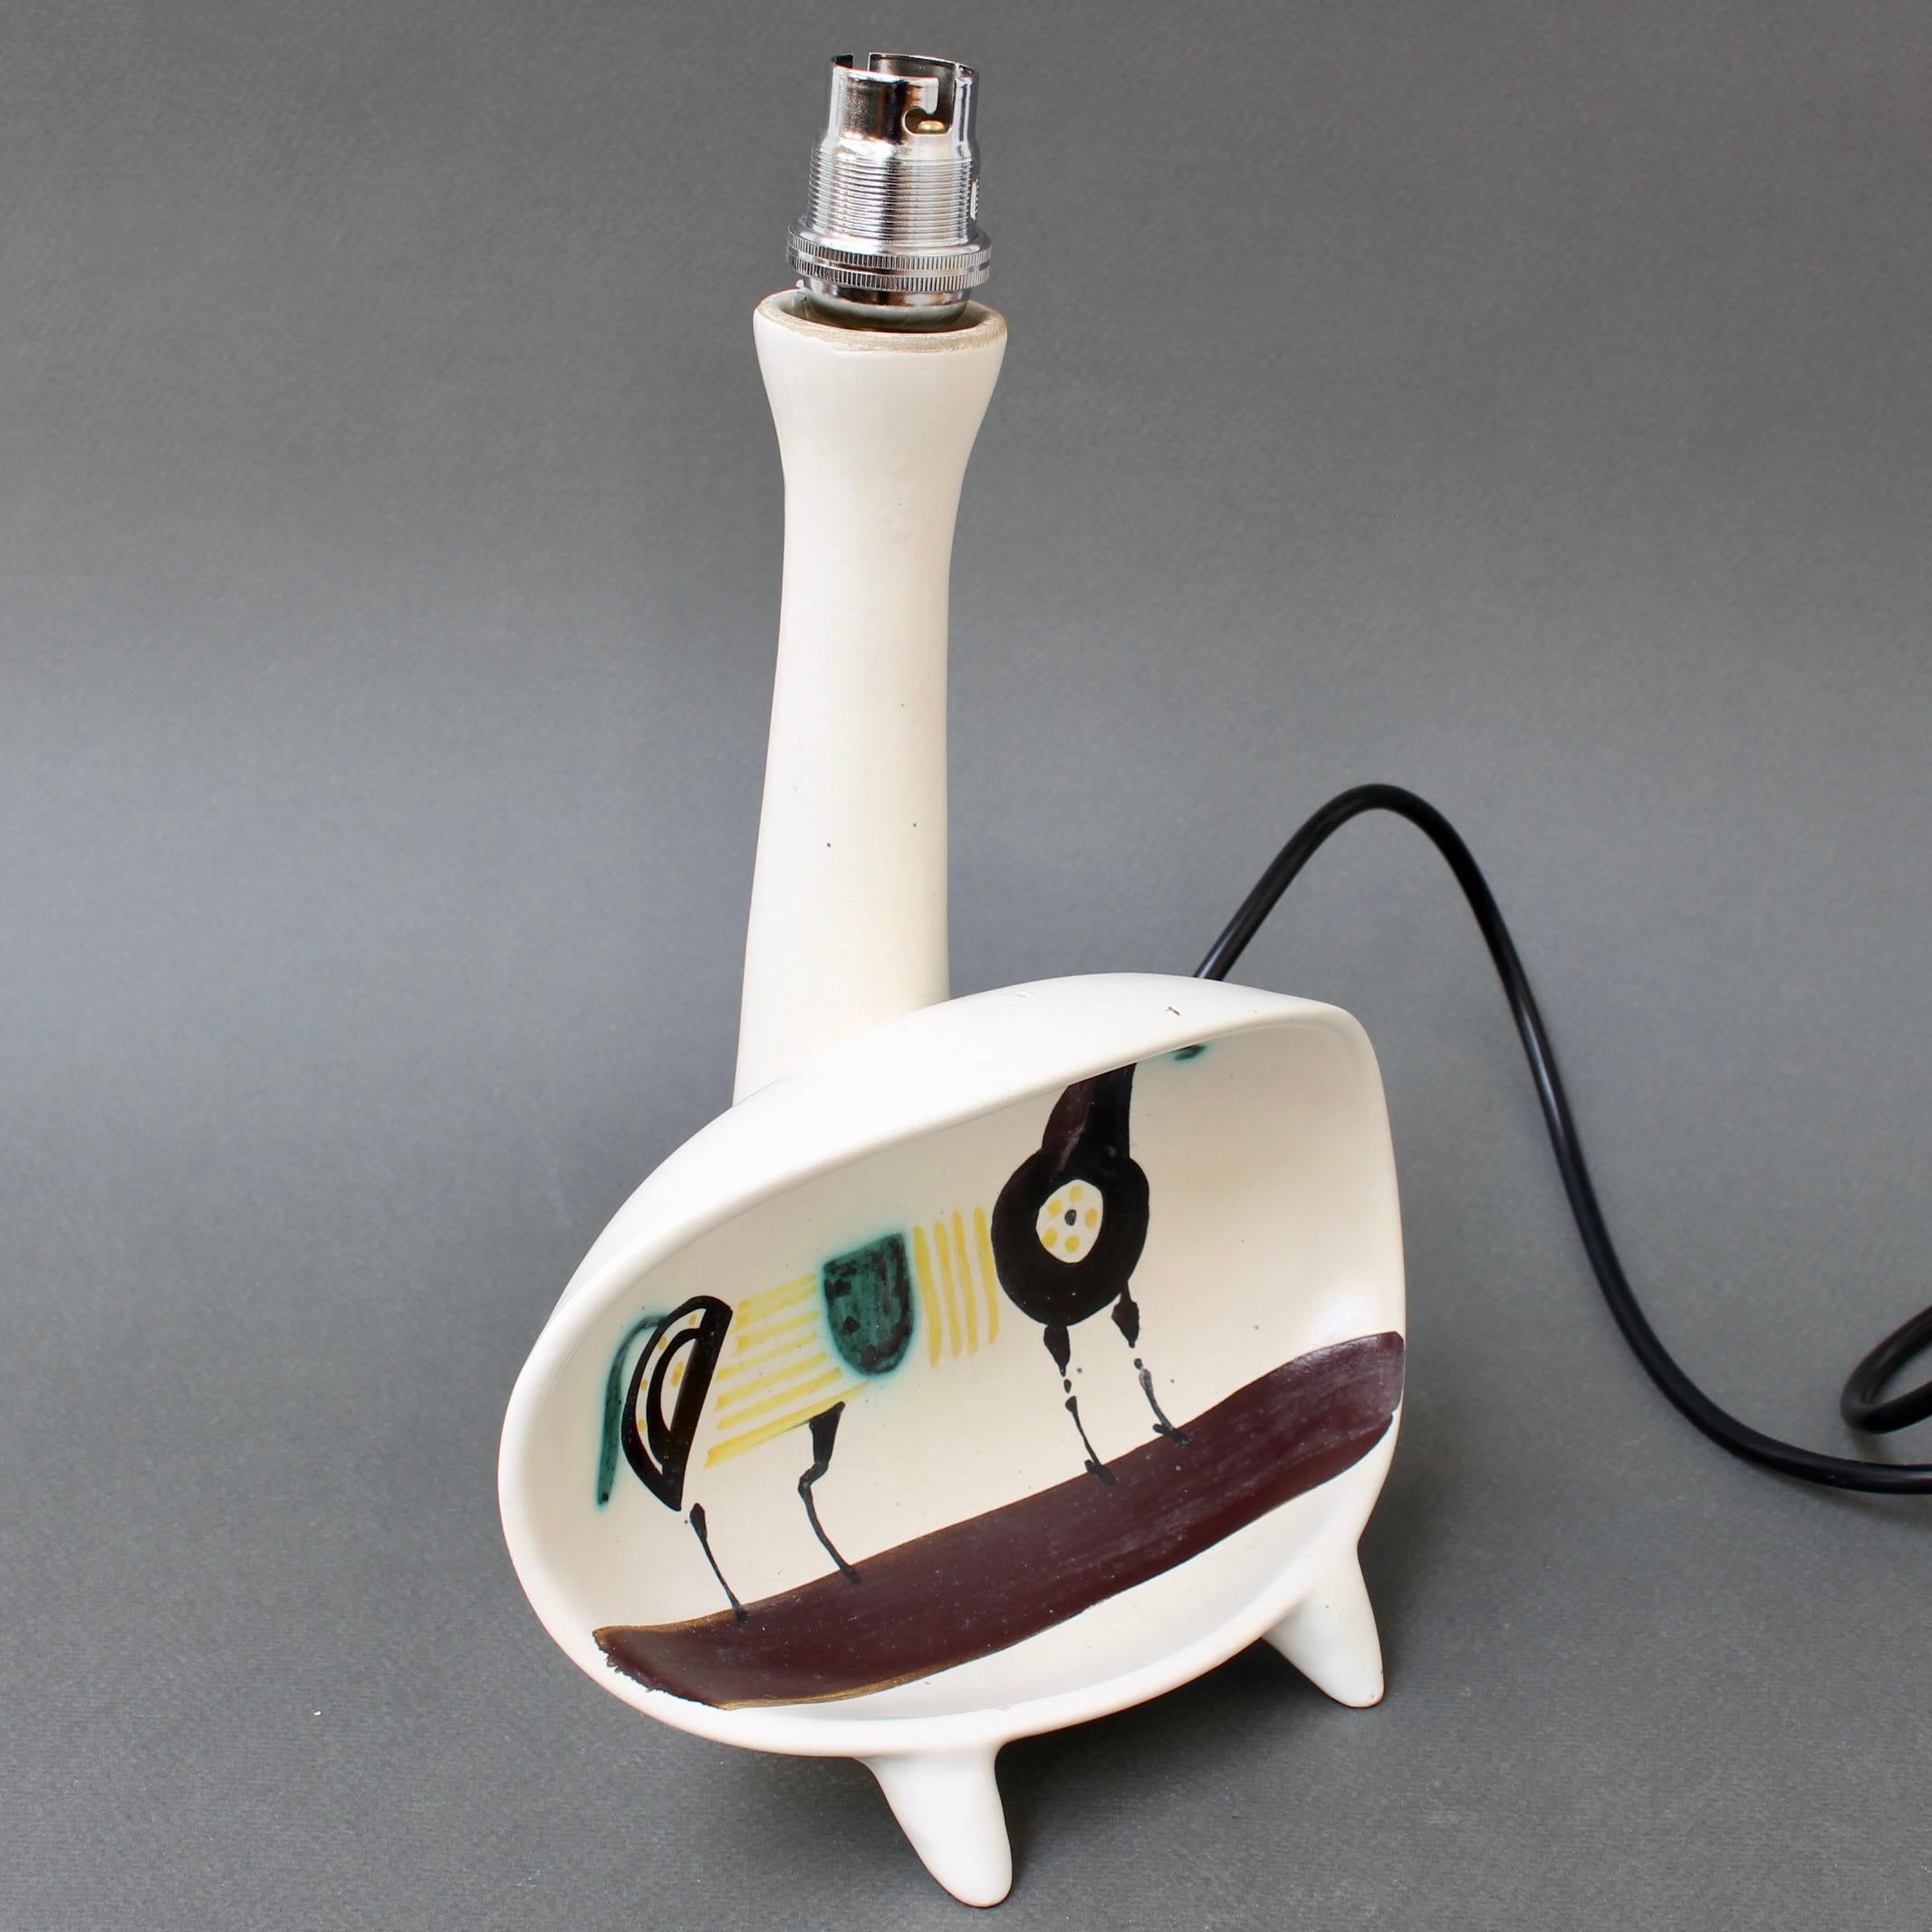 French Vintage Ceramic Table Lamp by Roger Capron, 'circa 1950s' For Sale 8